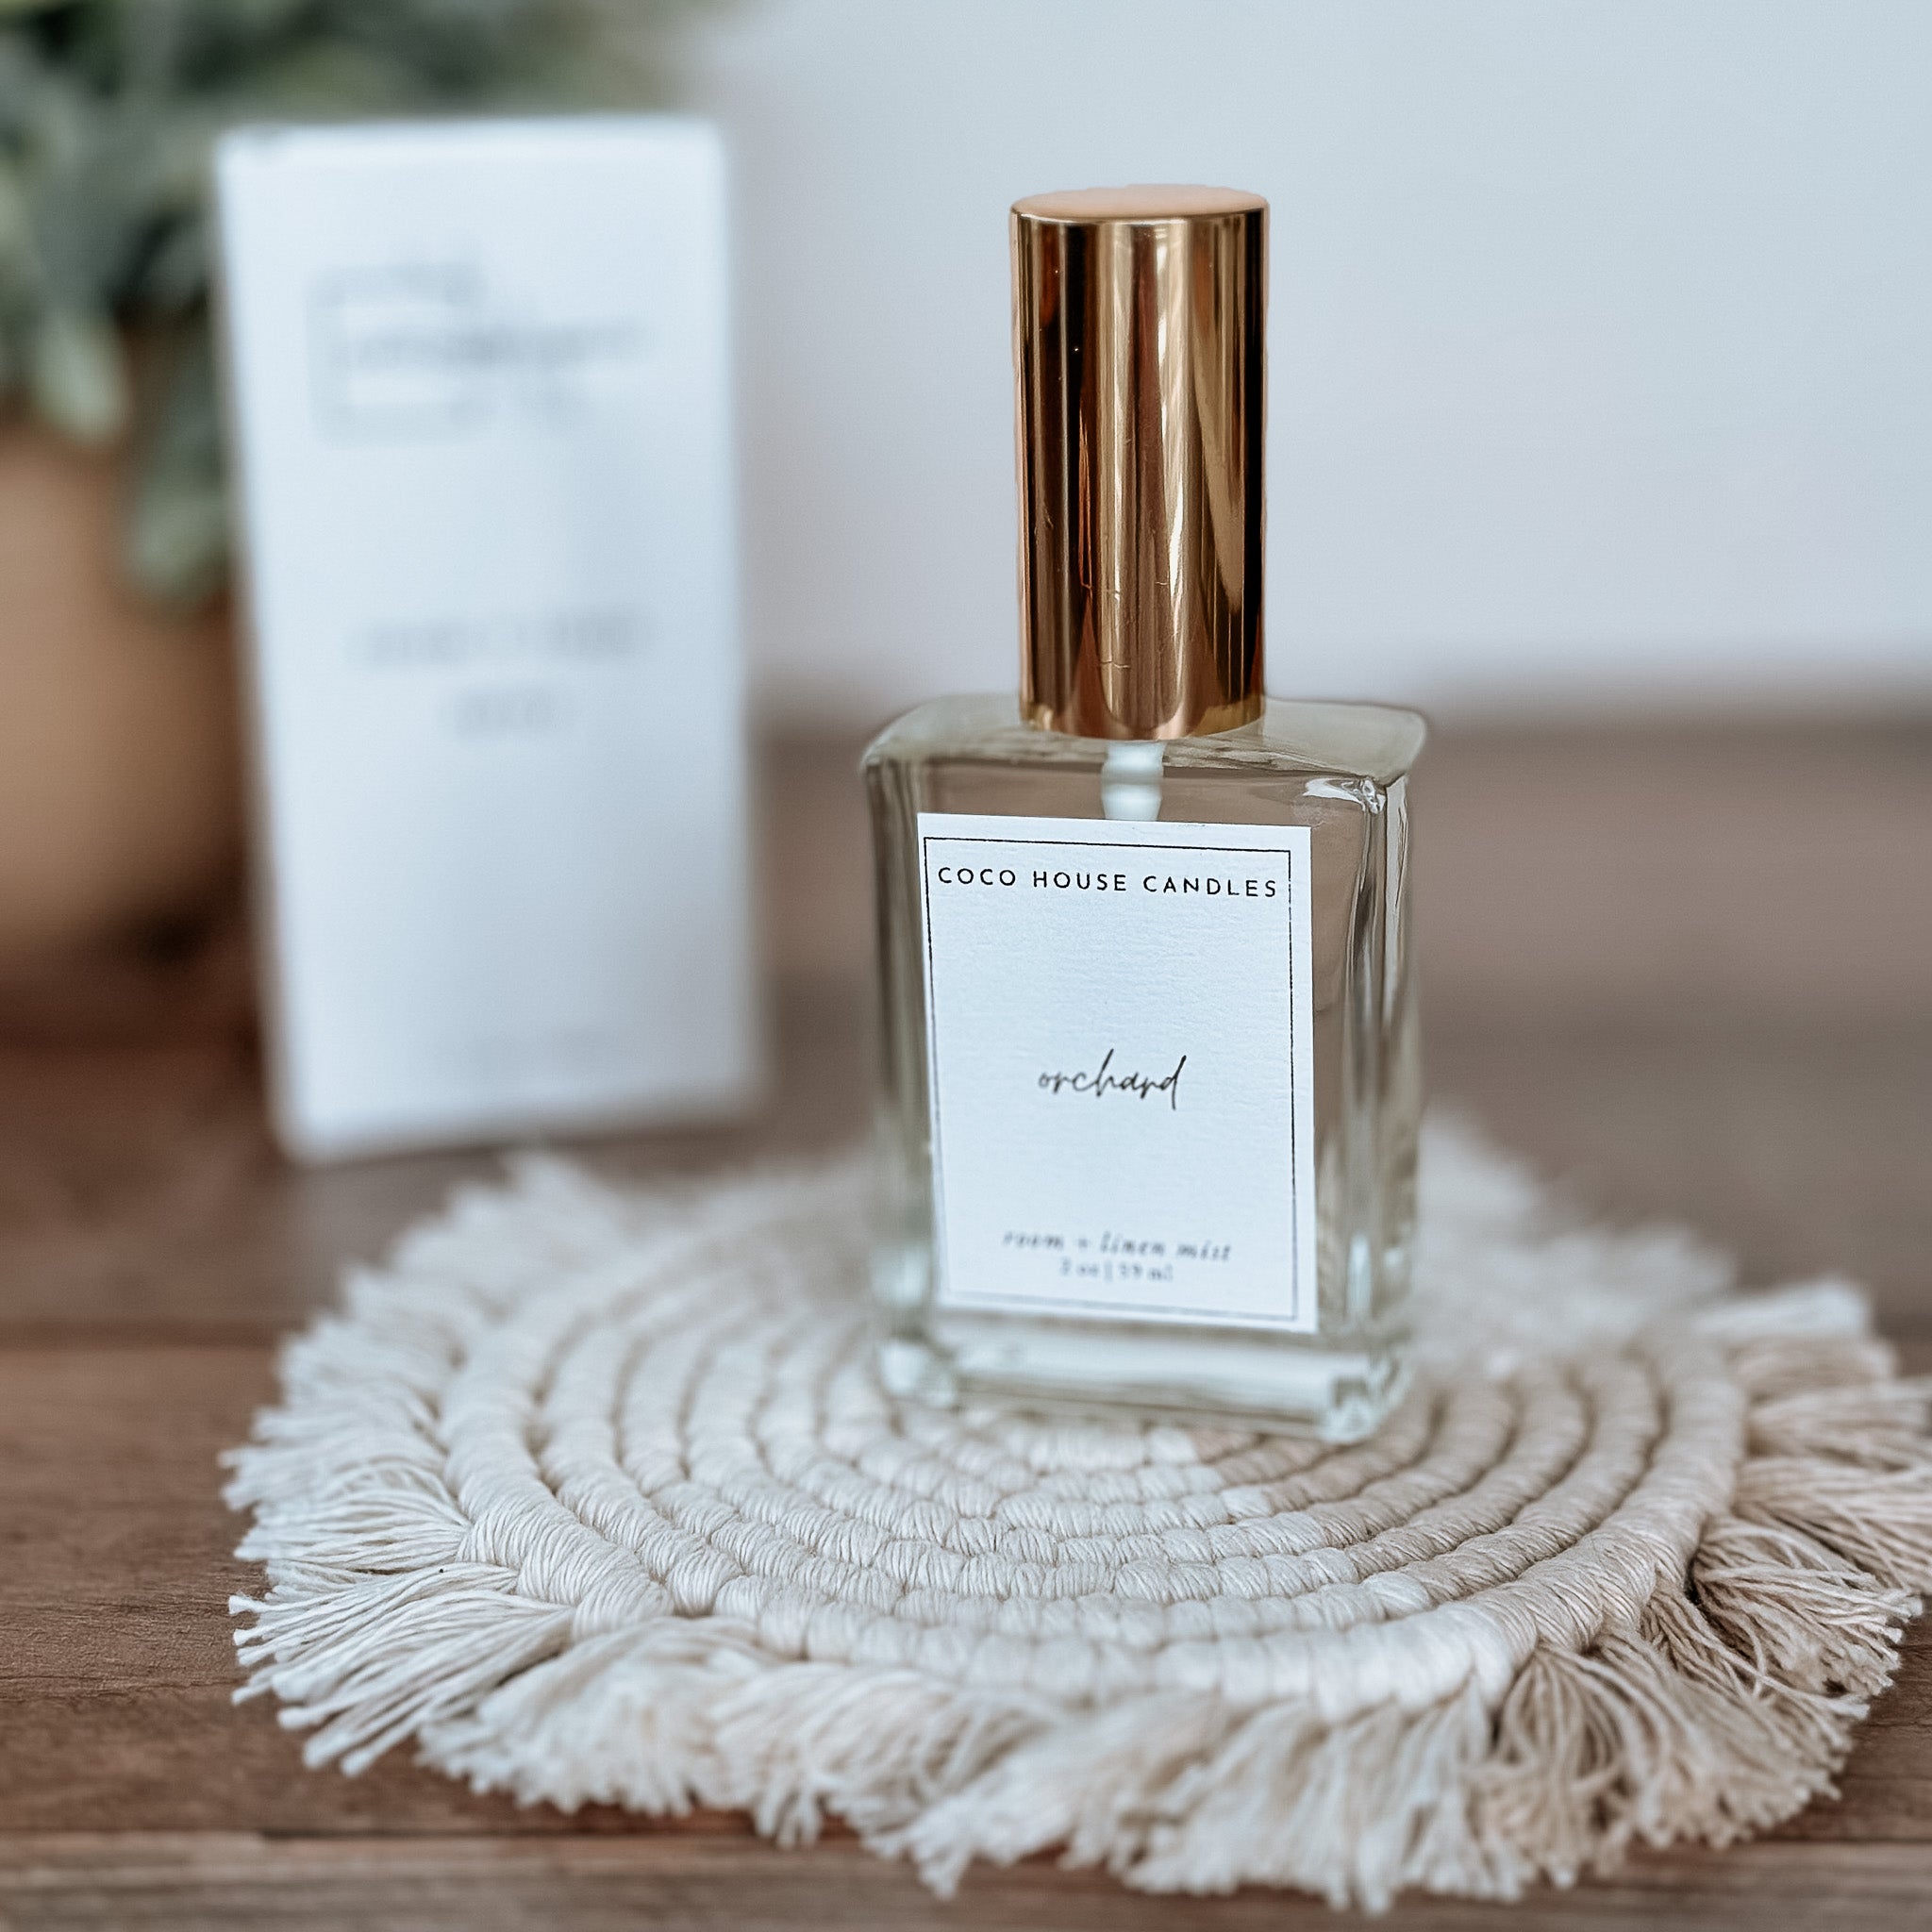 Fall Room + Linen Mists - Coco House Candles - Room + Linen Mist